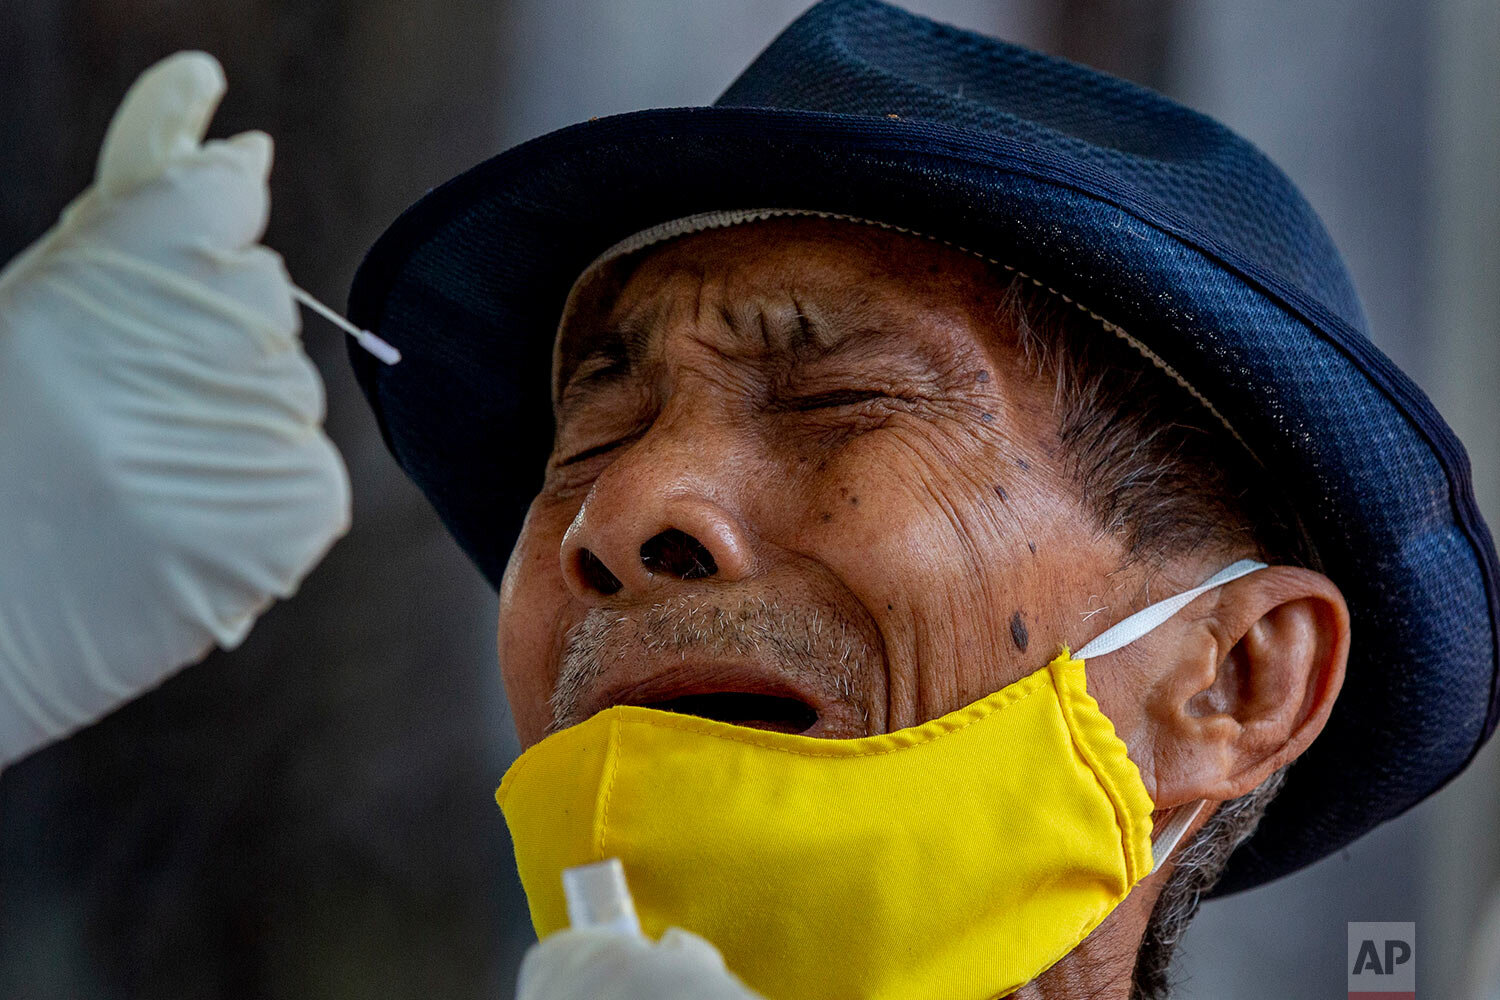  A man grimaces as a nasal swab sample is collected from him to test for COVID-19 in Bangkok, Thailand, Wednesday, May 6, 2020.  (AP Photo/Gemunu Amarasinghe) 